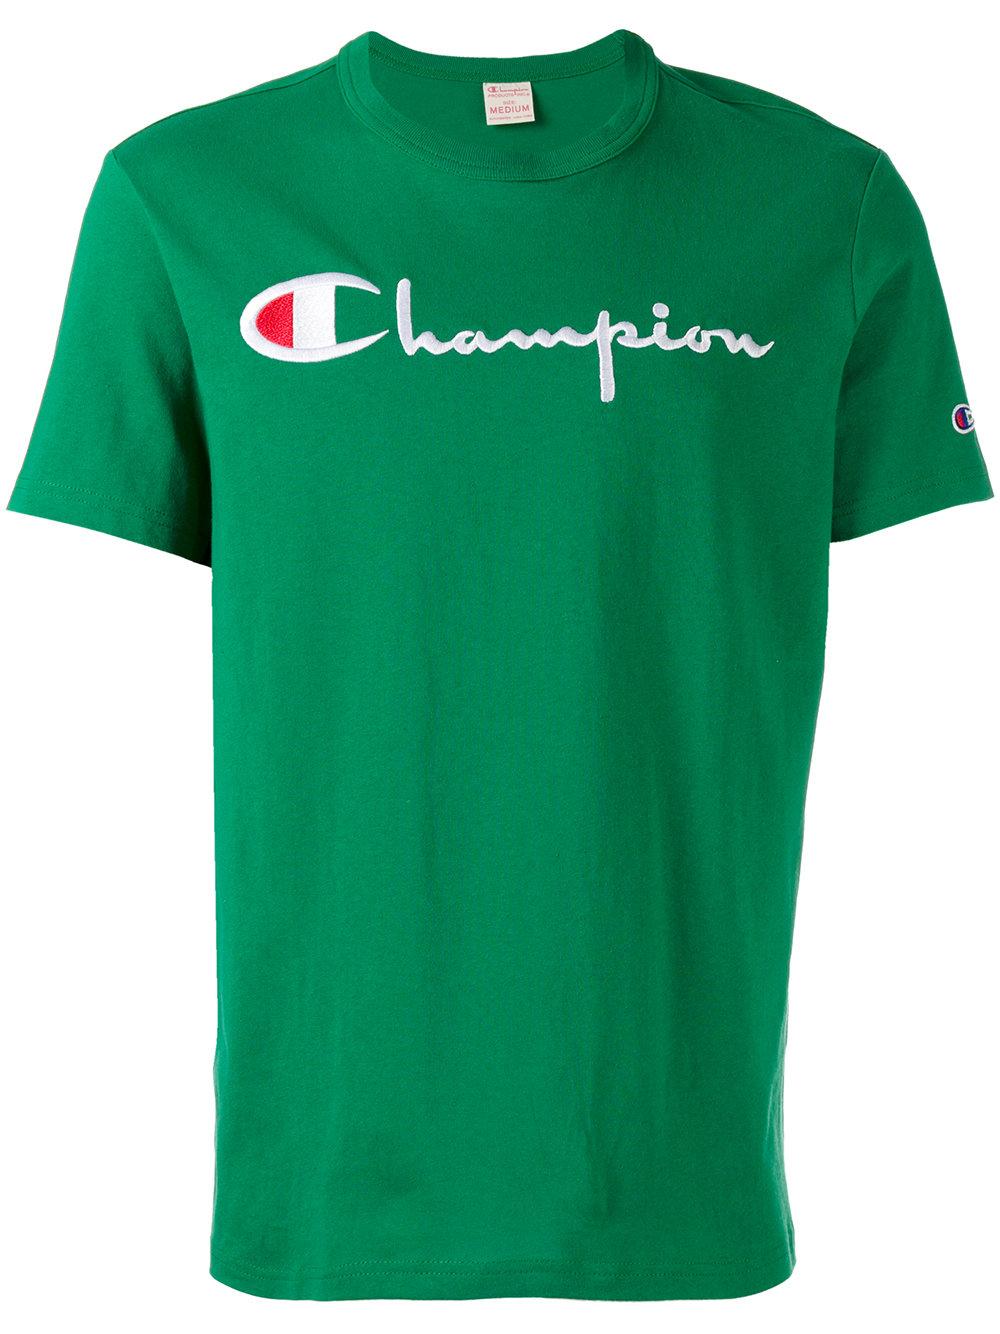 Champion Cotton Print T-shirt in Green for Men - Lyst